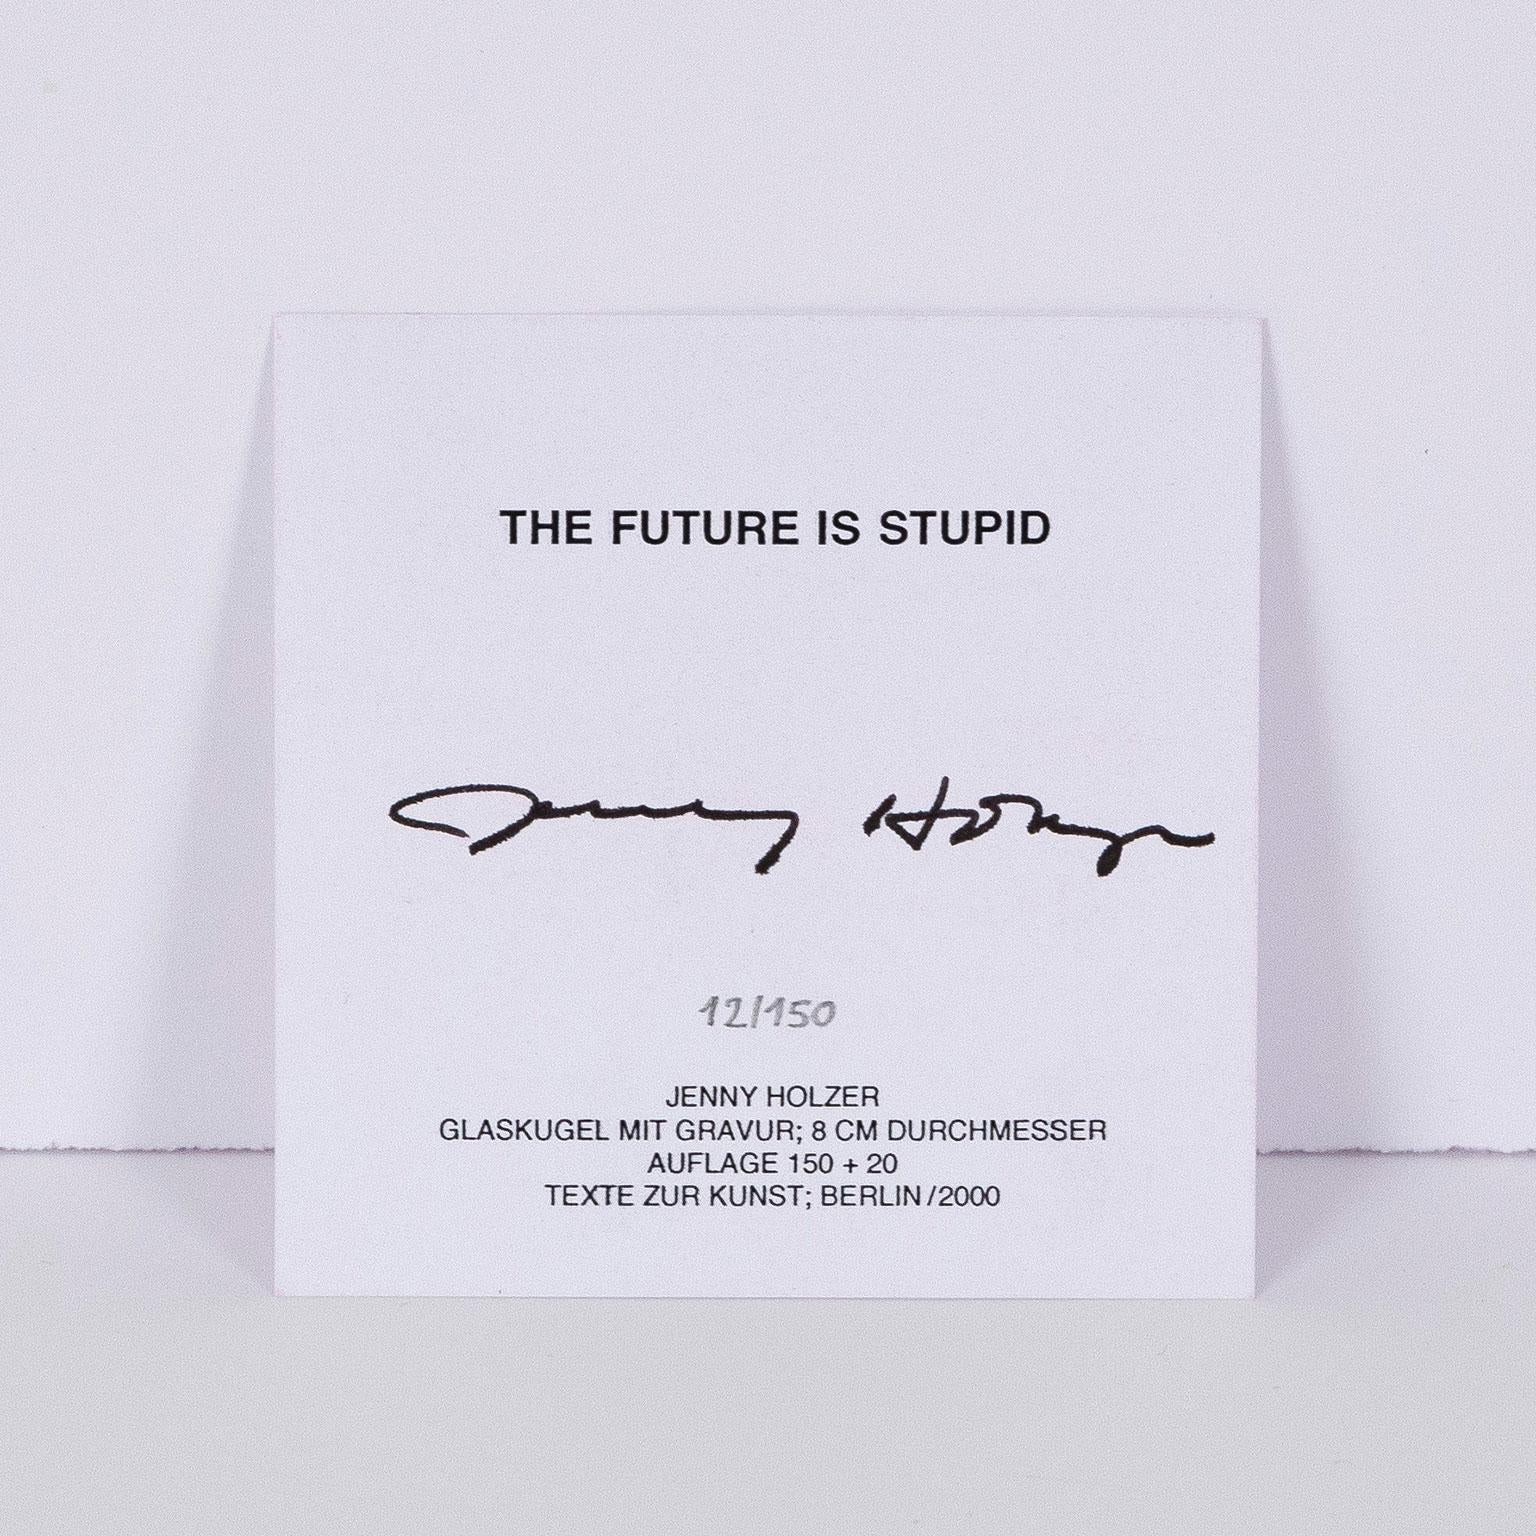 The Future Is Stupid - Conceptual Sculpture by Jenny Holzer